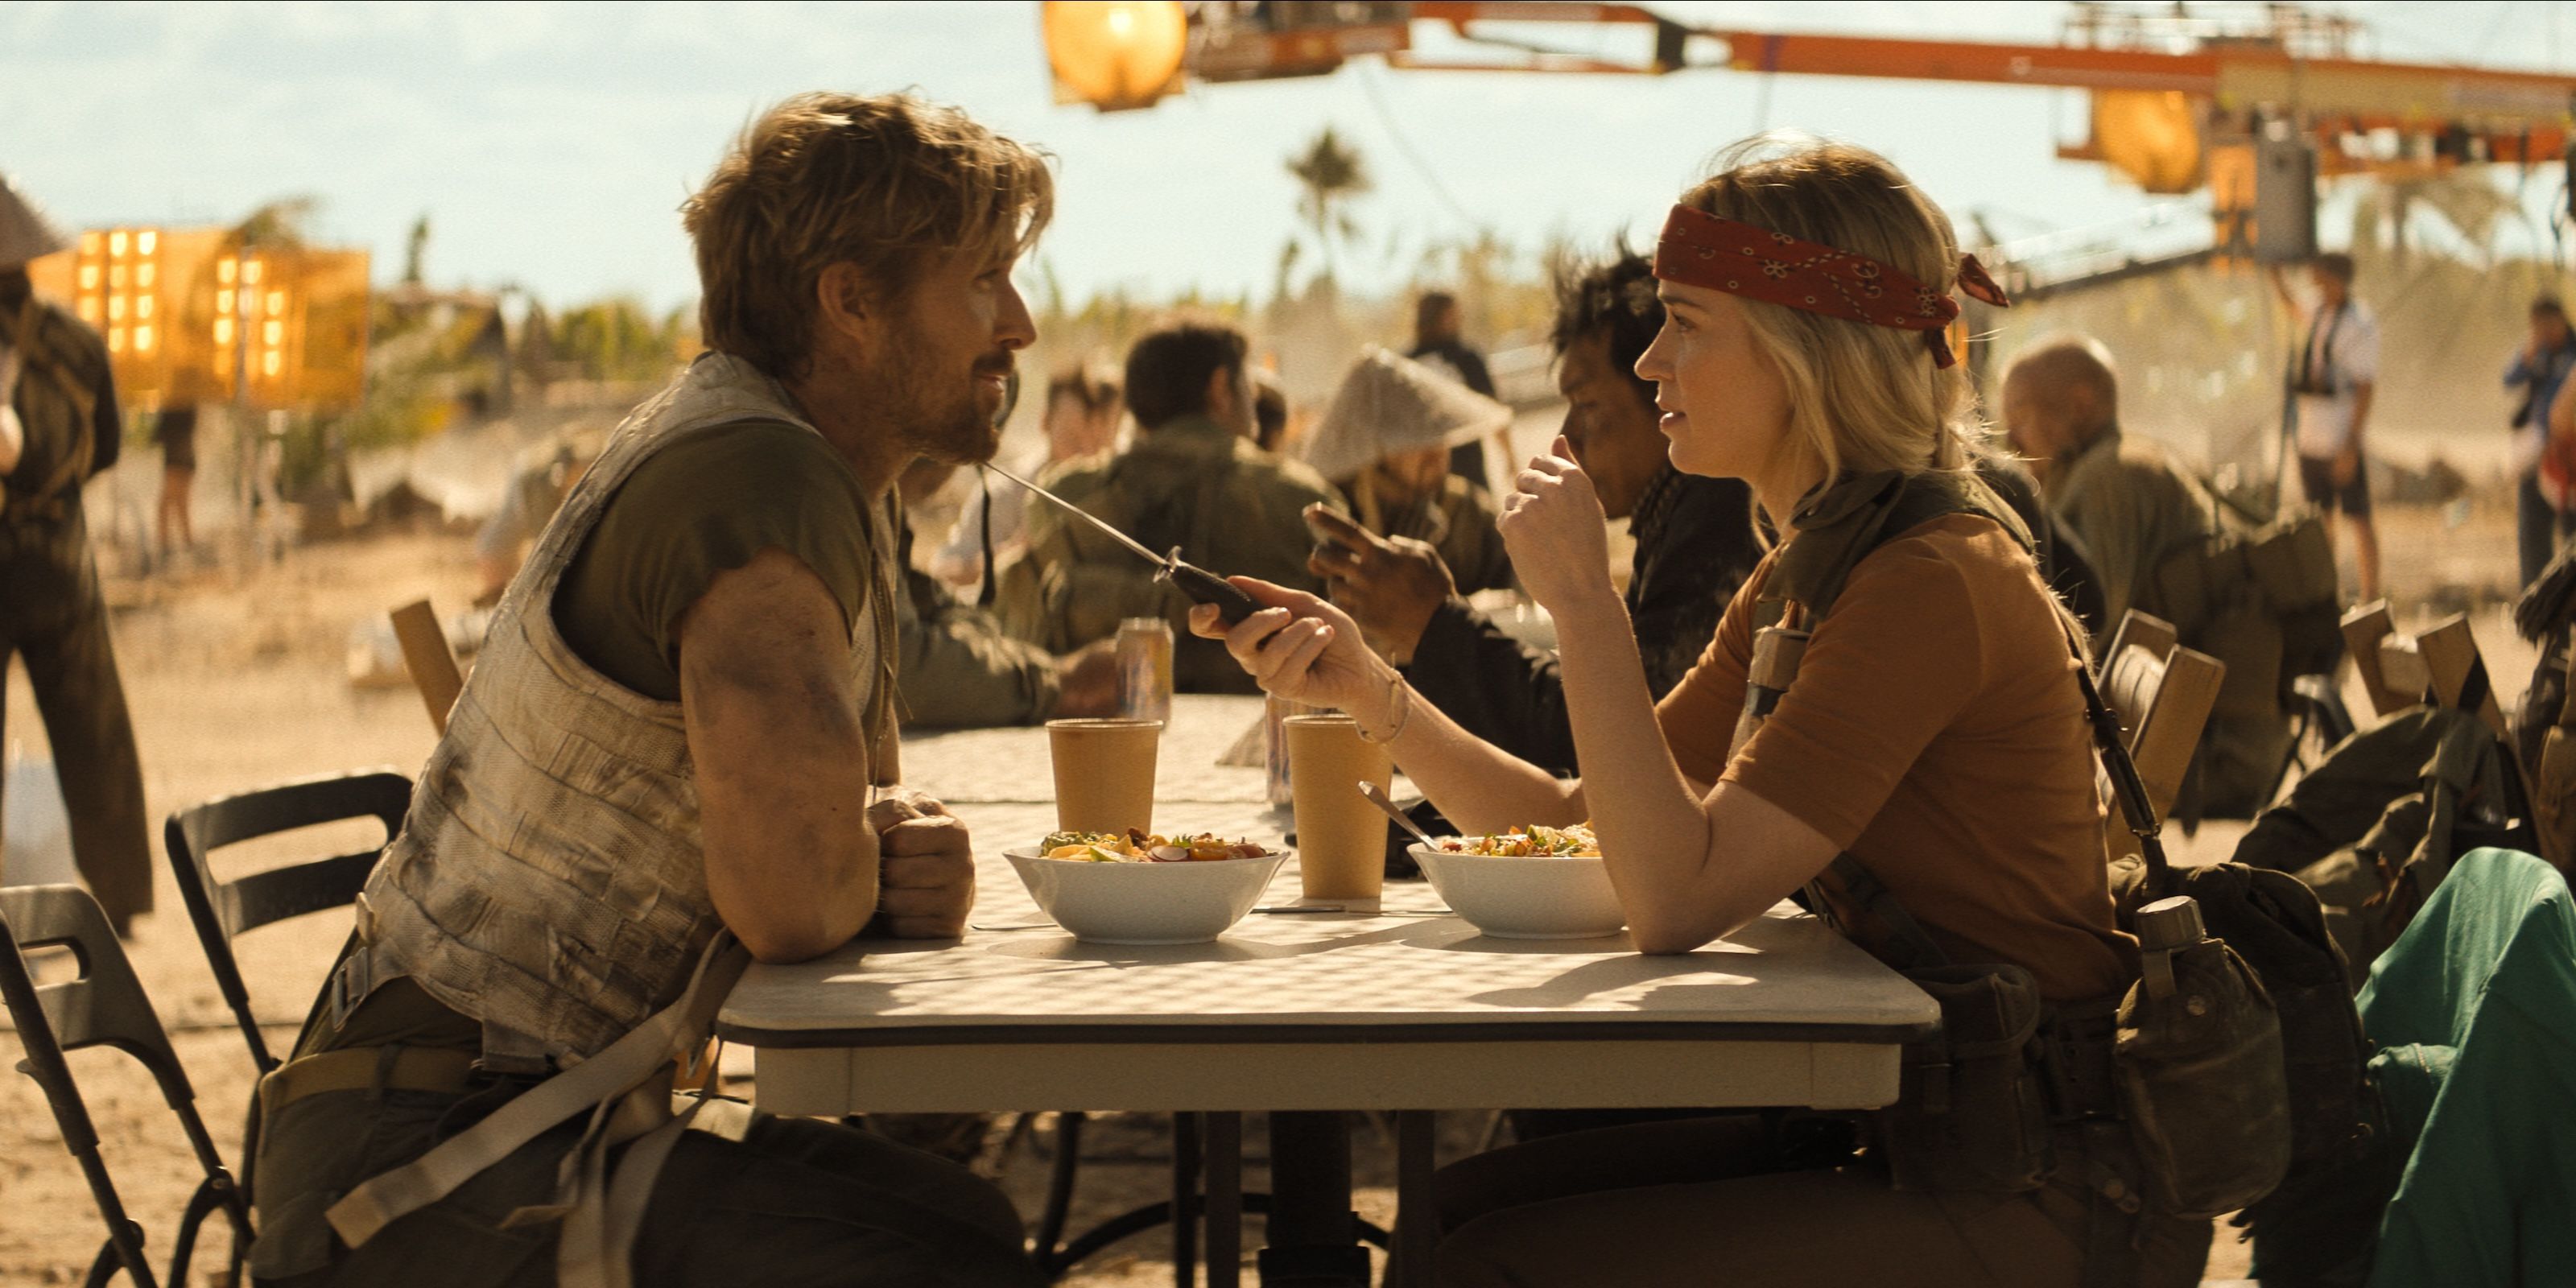 Ryan Gosling and Emily Blunt chat at a table on the set of Metalstorm in The Fall Guy movie